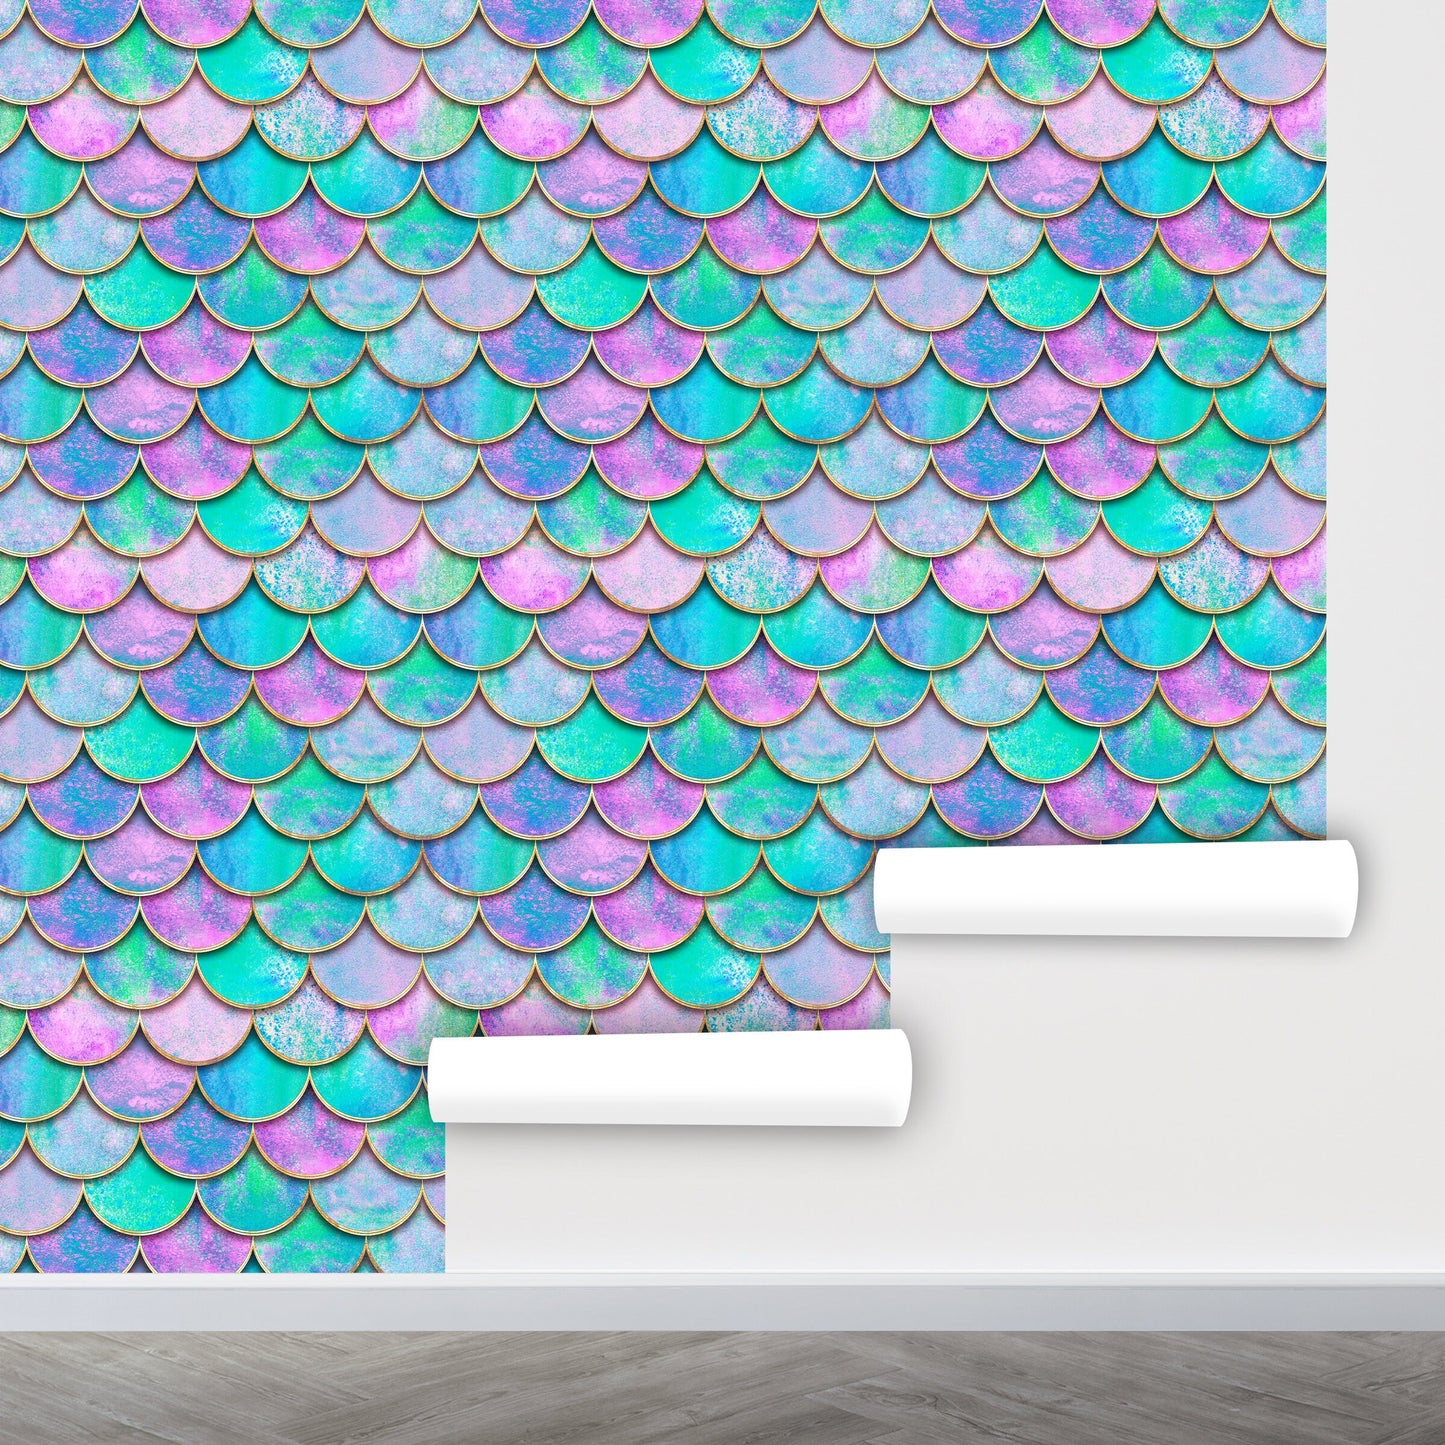 Mermaid Scales Wallpaper Peel and Stick, Girls Room Wallpaper, Removable Wall Paper